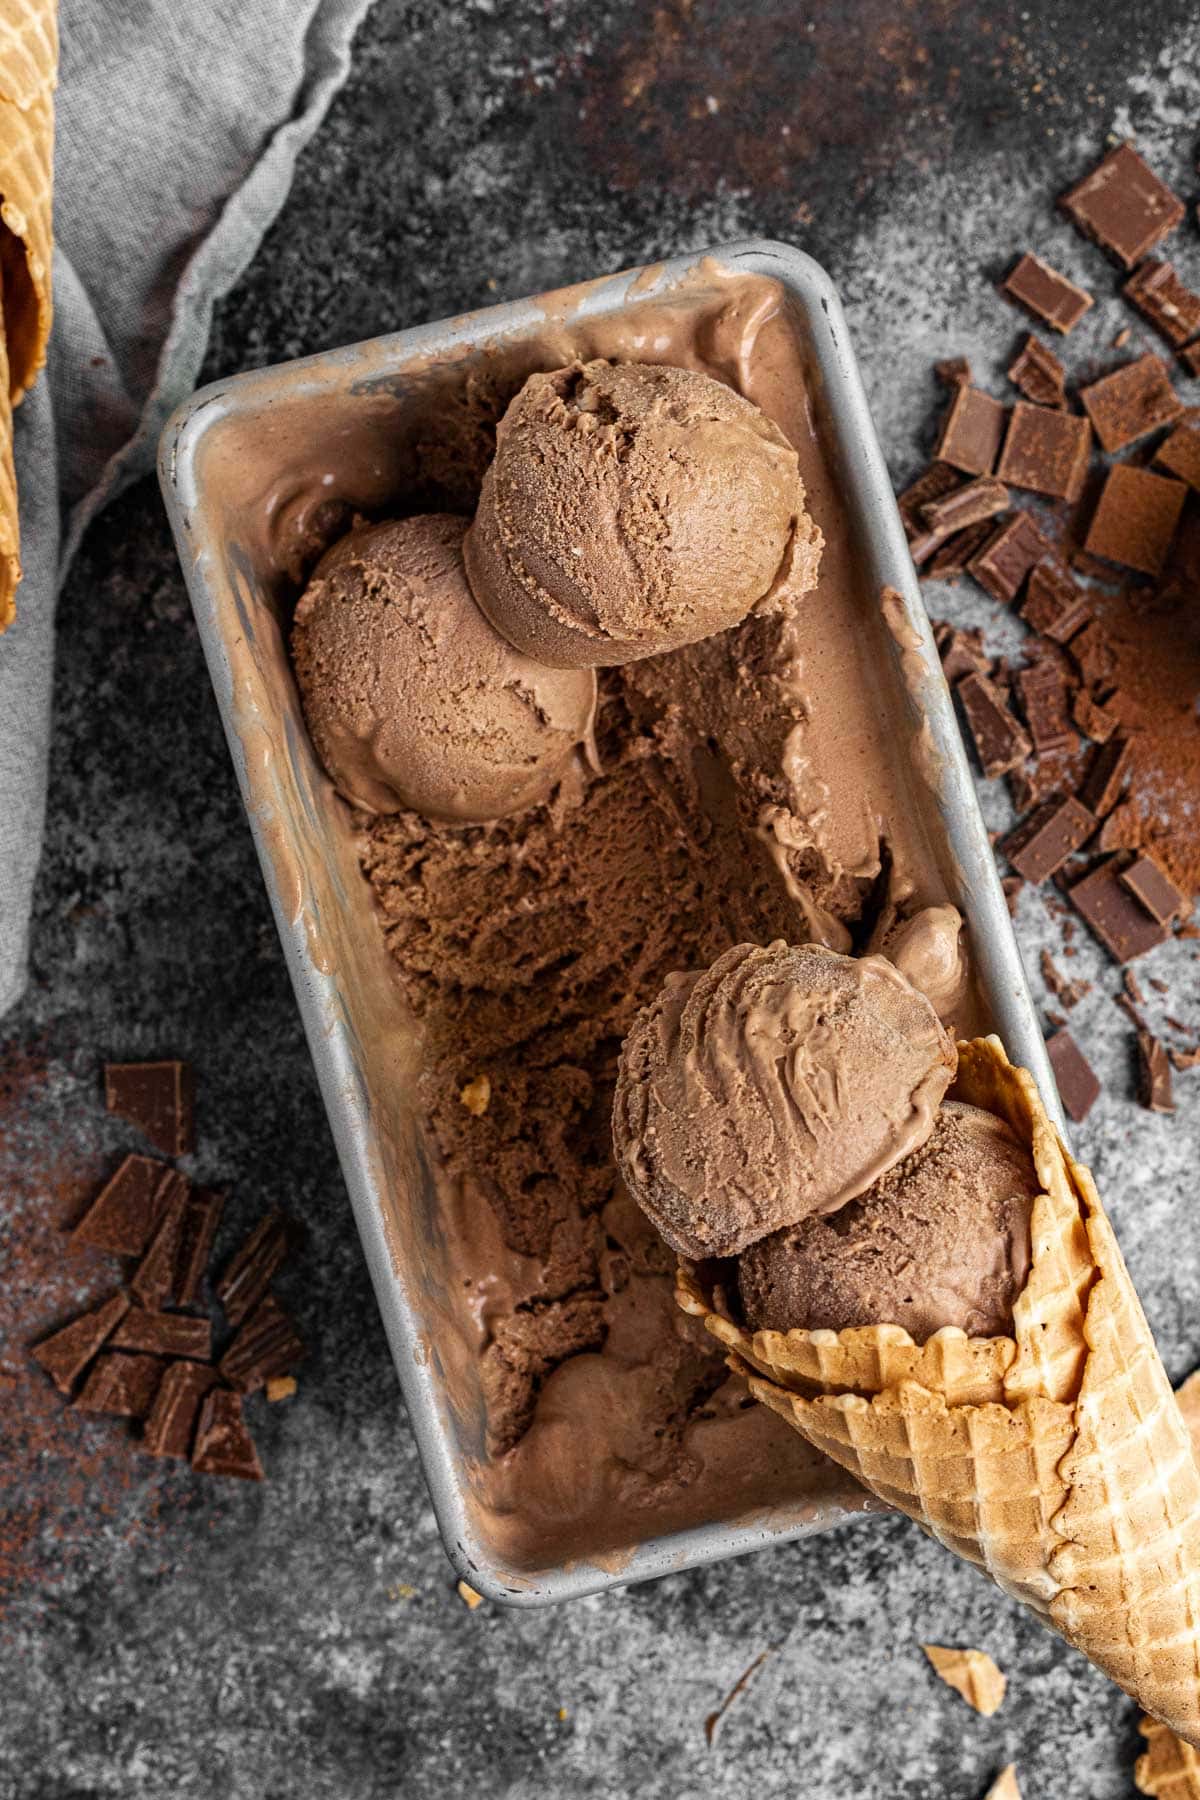 Chocolate Ice Cream scoops in cone in pan